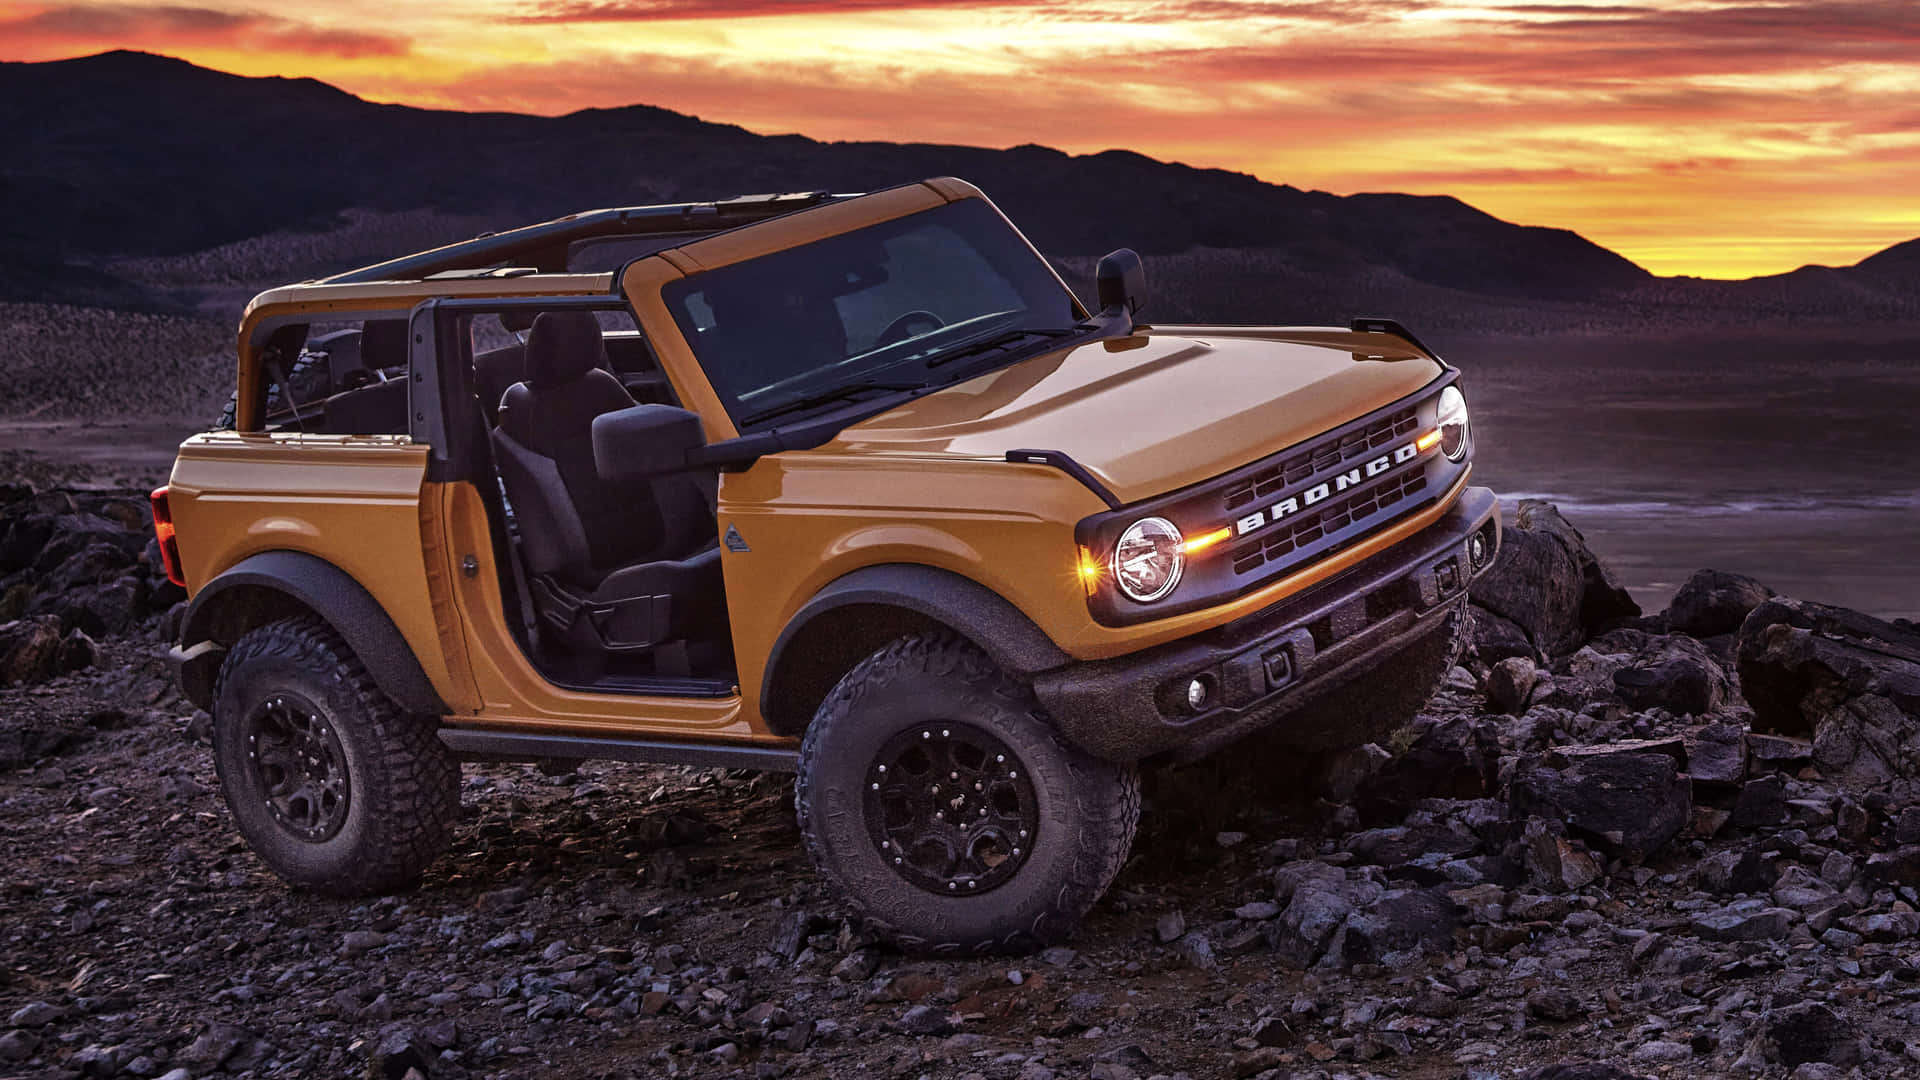 The 2020 Ford Bronco Is Shown In The Desert Wallpaper